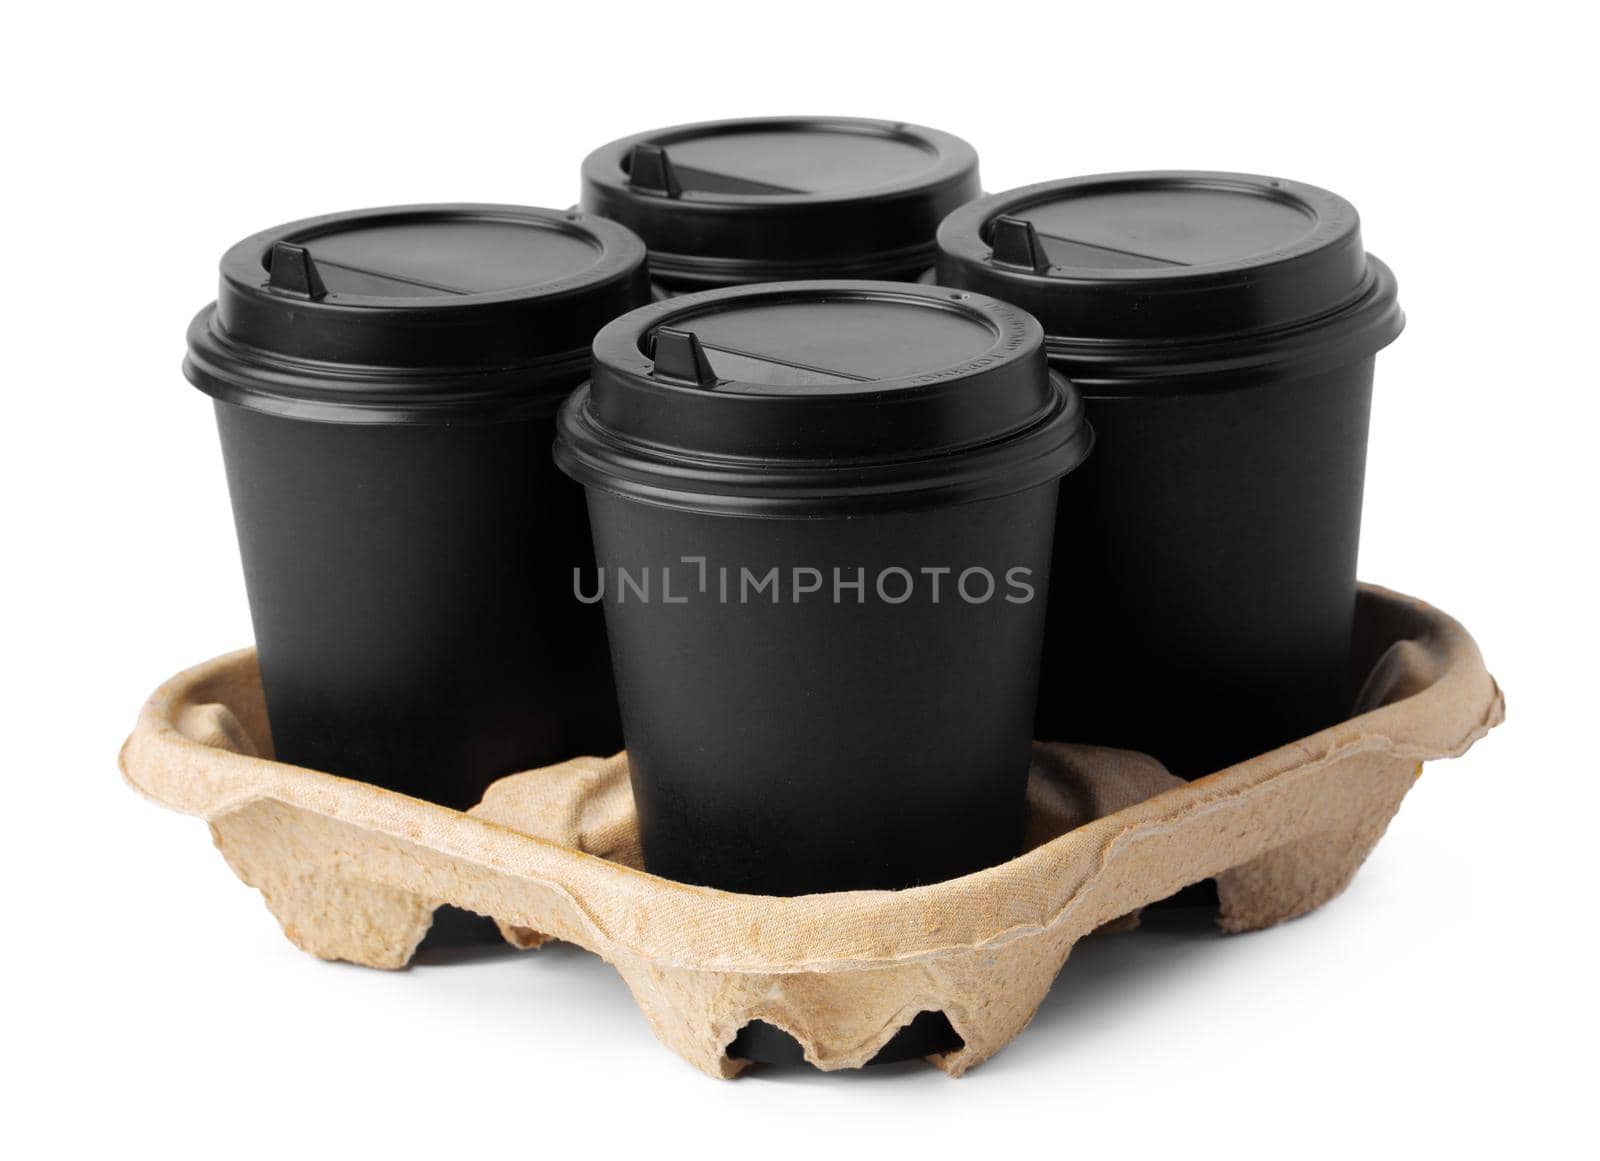 Four takeaway coffee cups in a tray isolated on white by Fabrikasimf